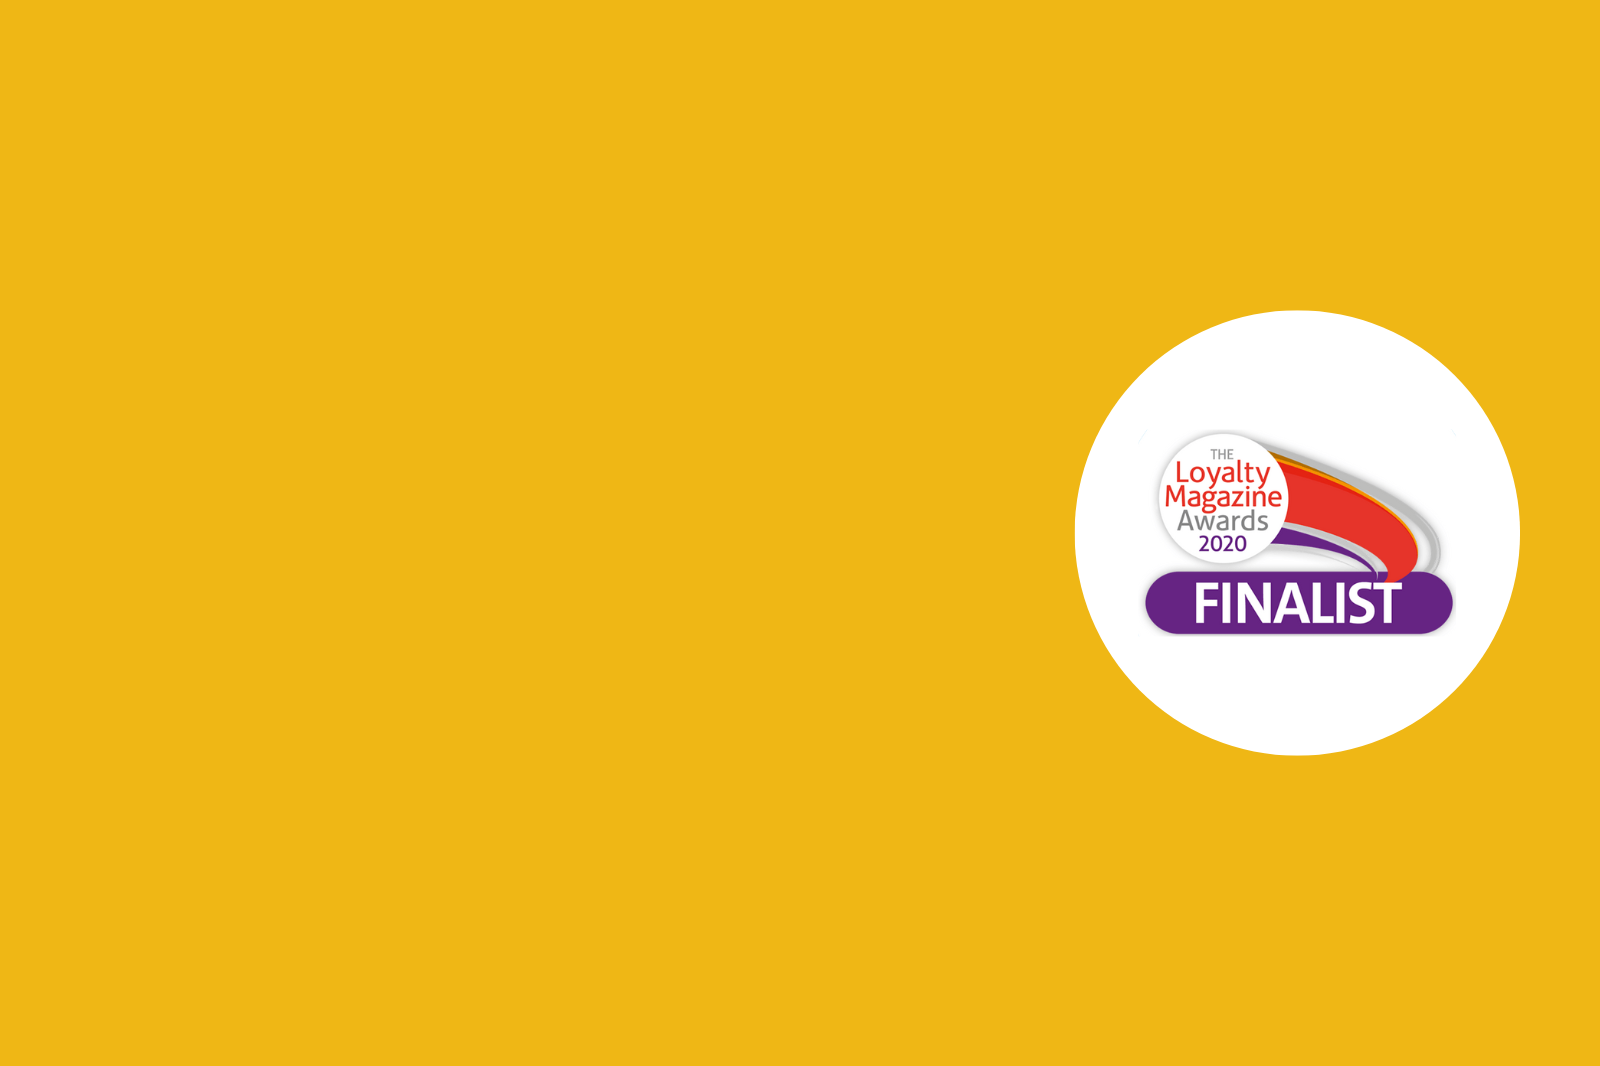 A yellow background with a purple logo representing the Loyalty Magazine Awards 2020 Finalists.